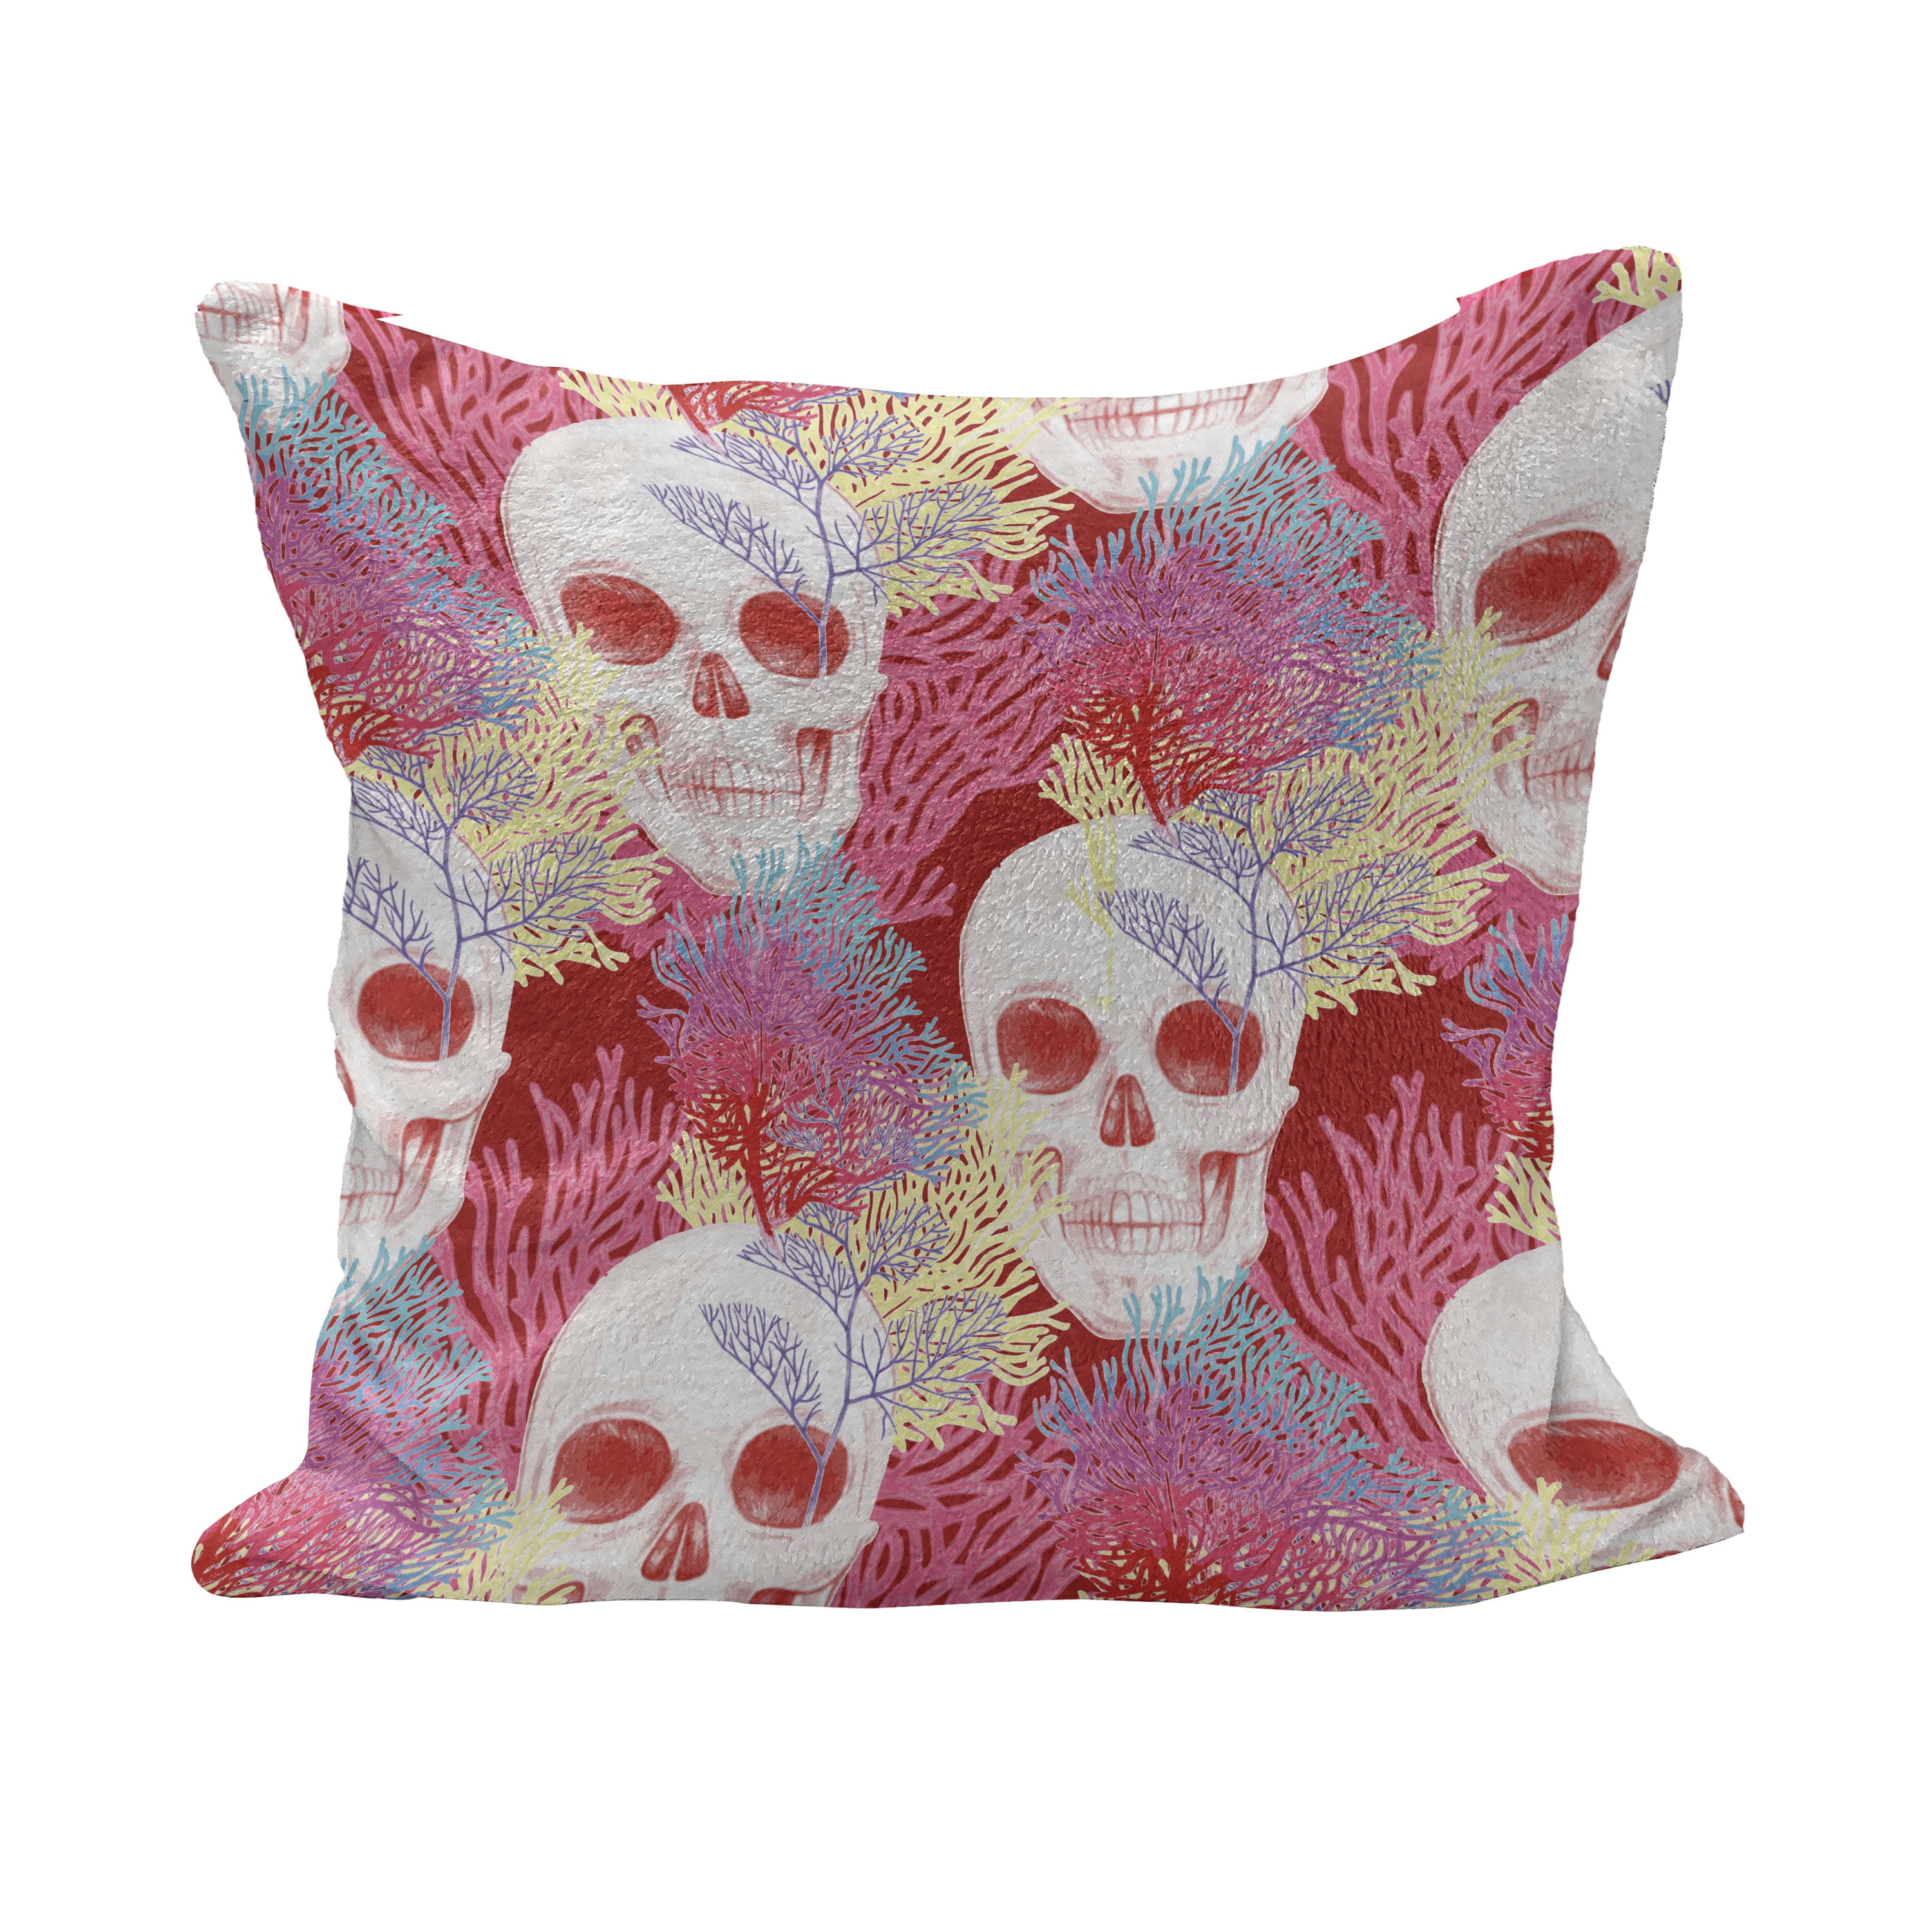 Skull Embroidered Cushion Cover 12”x12” 